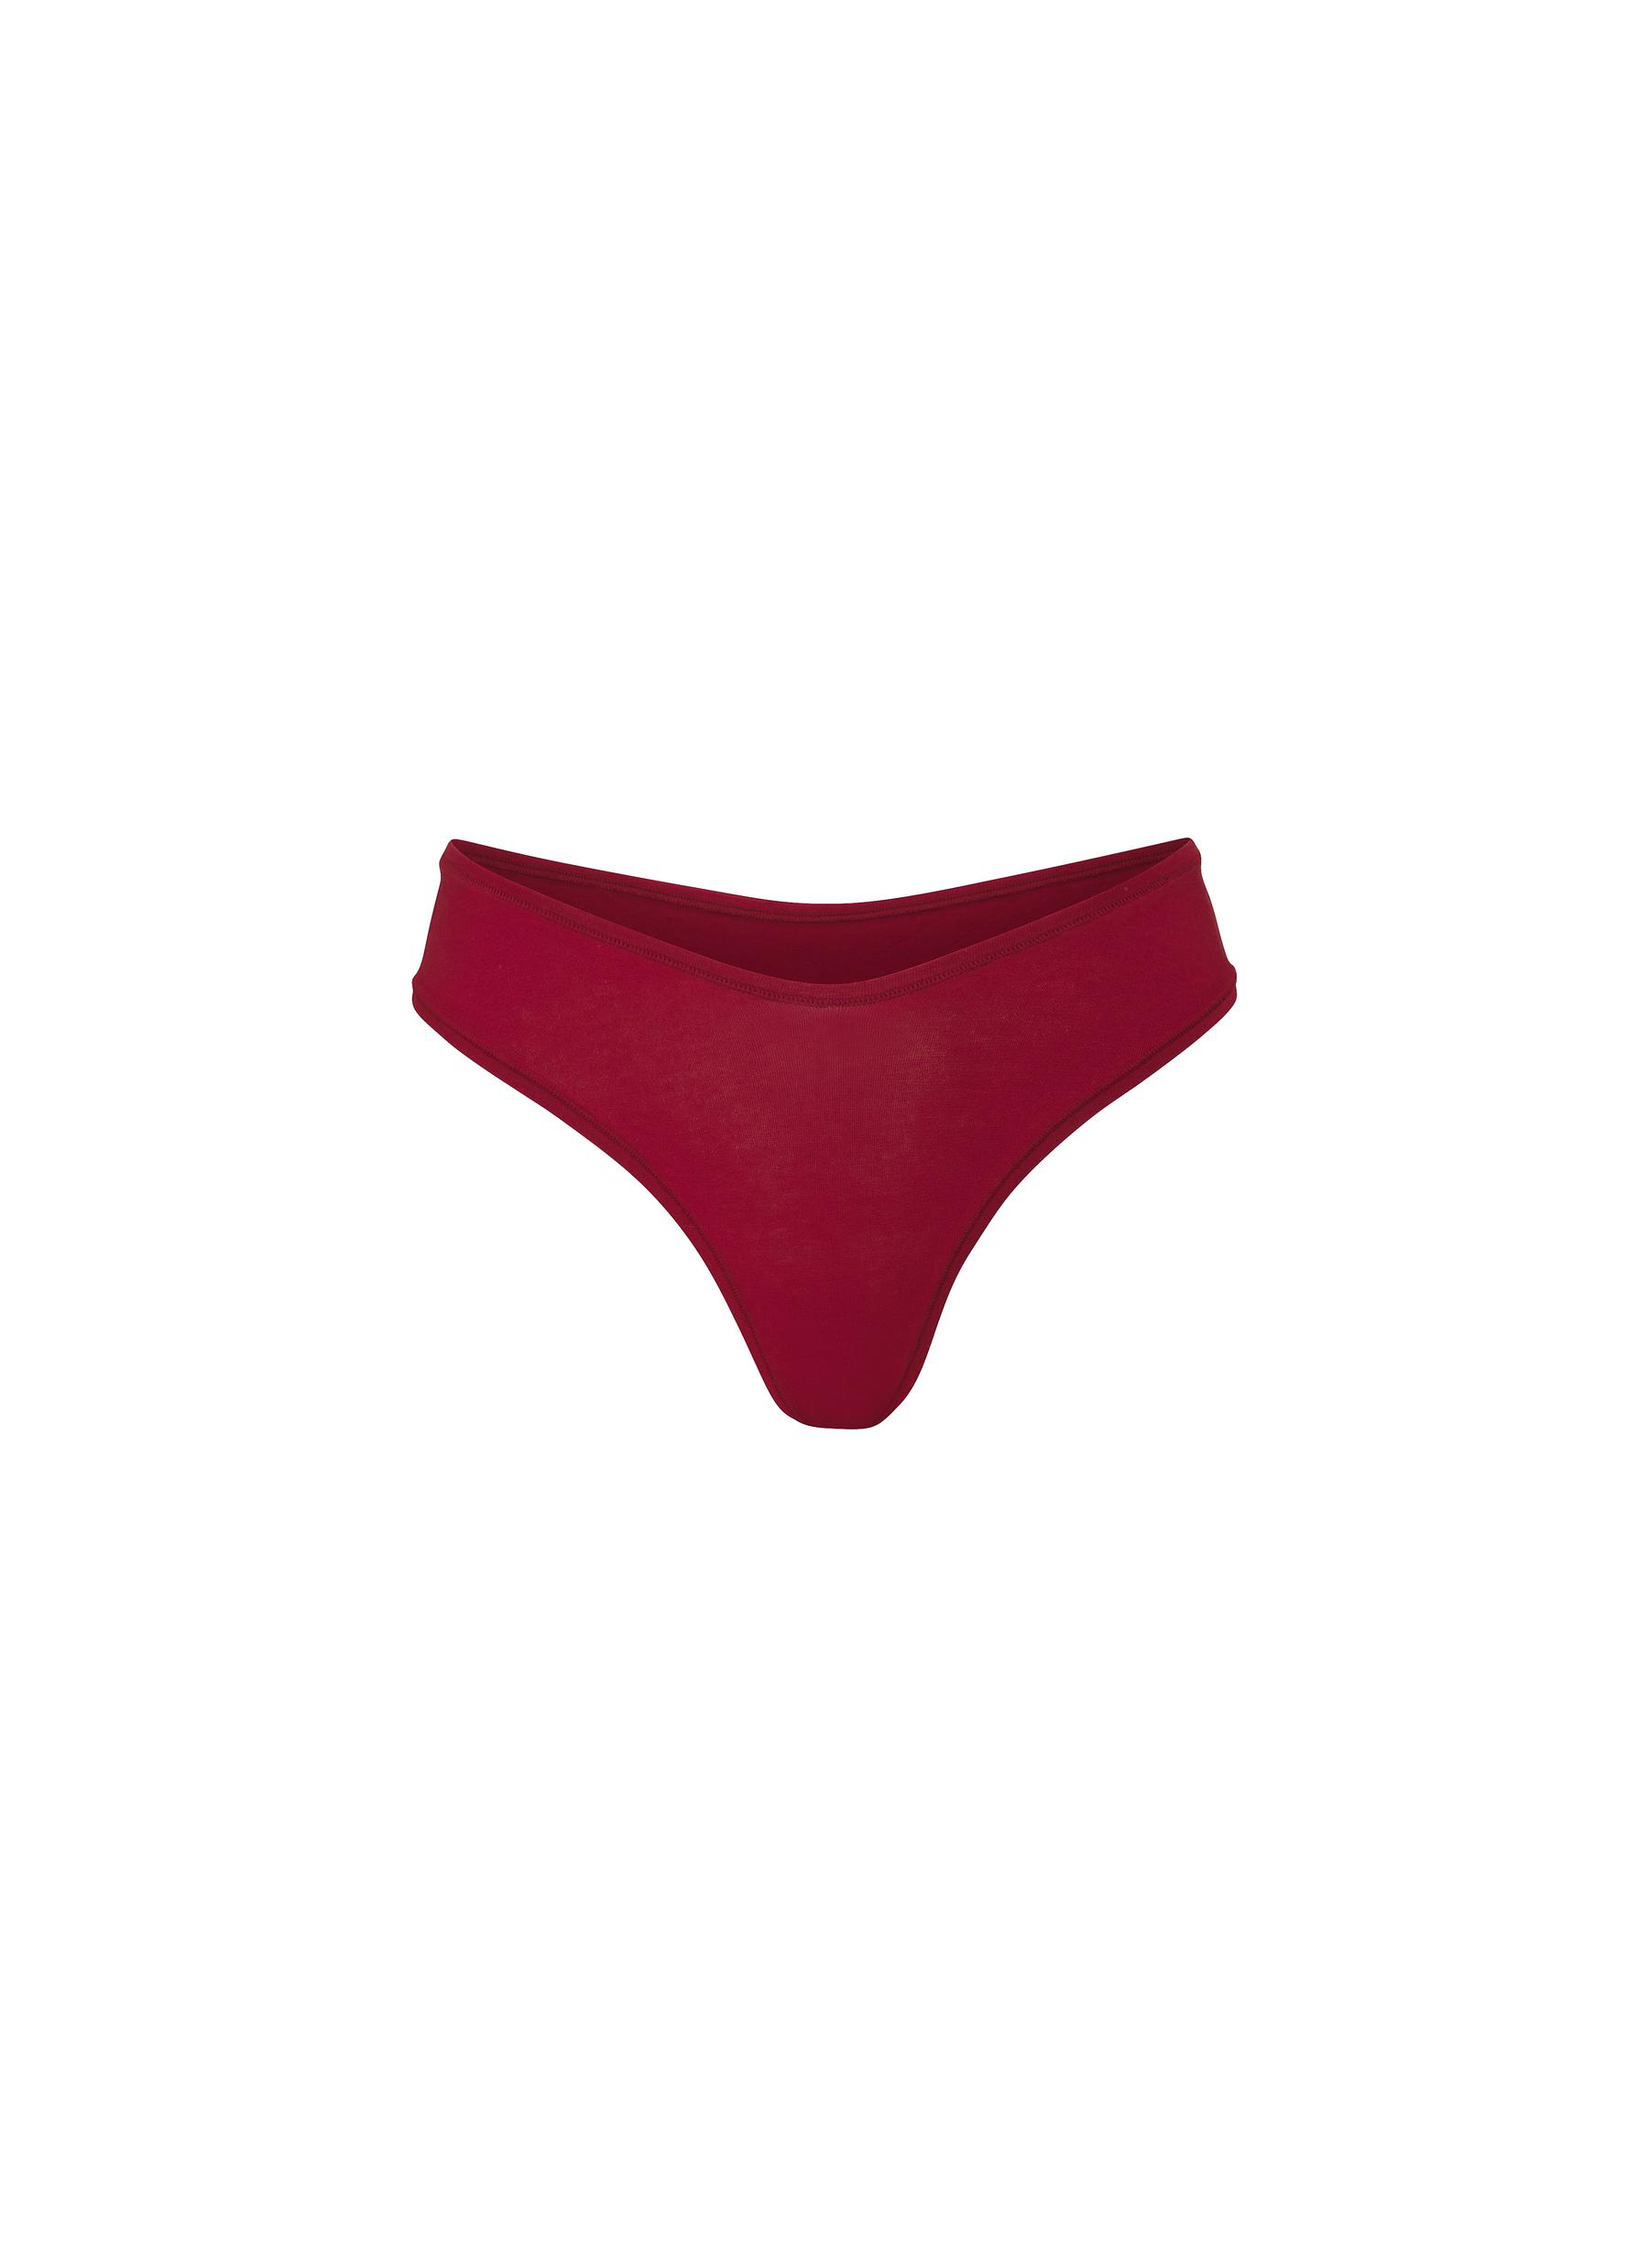 'COTTON JERSEY' DIPPED THONG